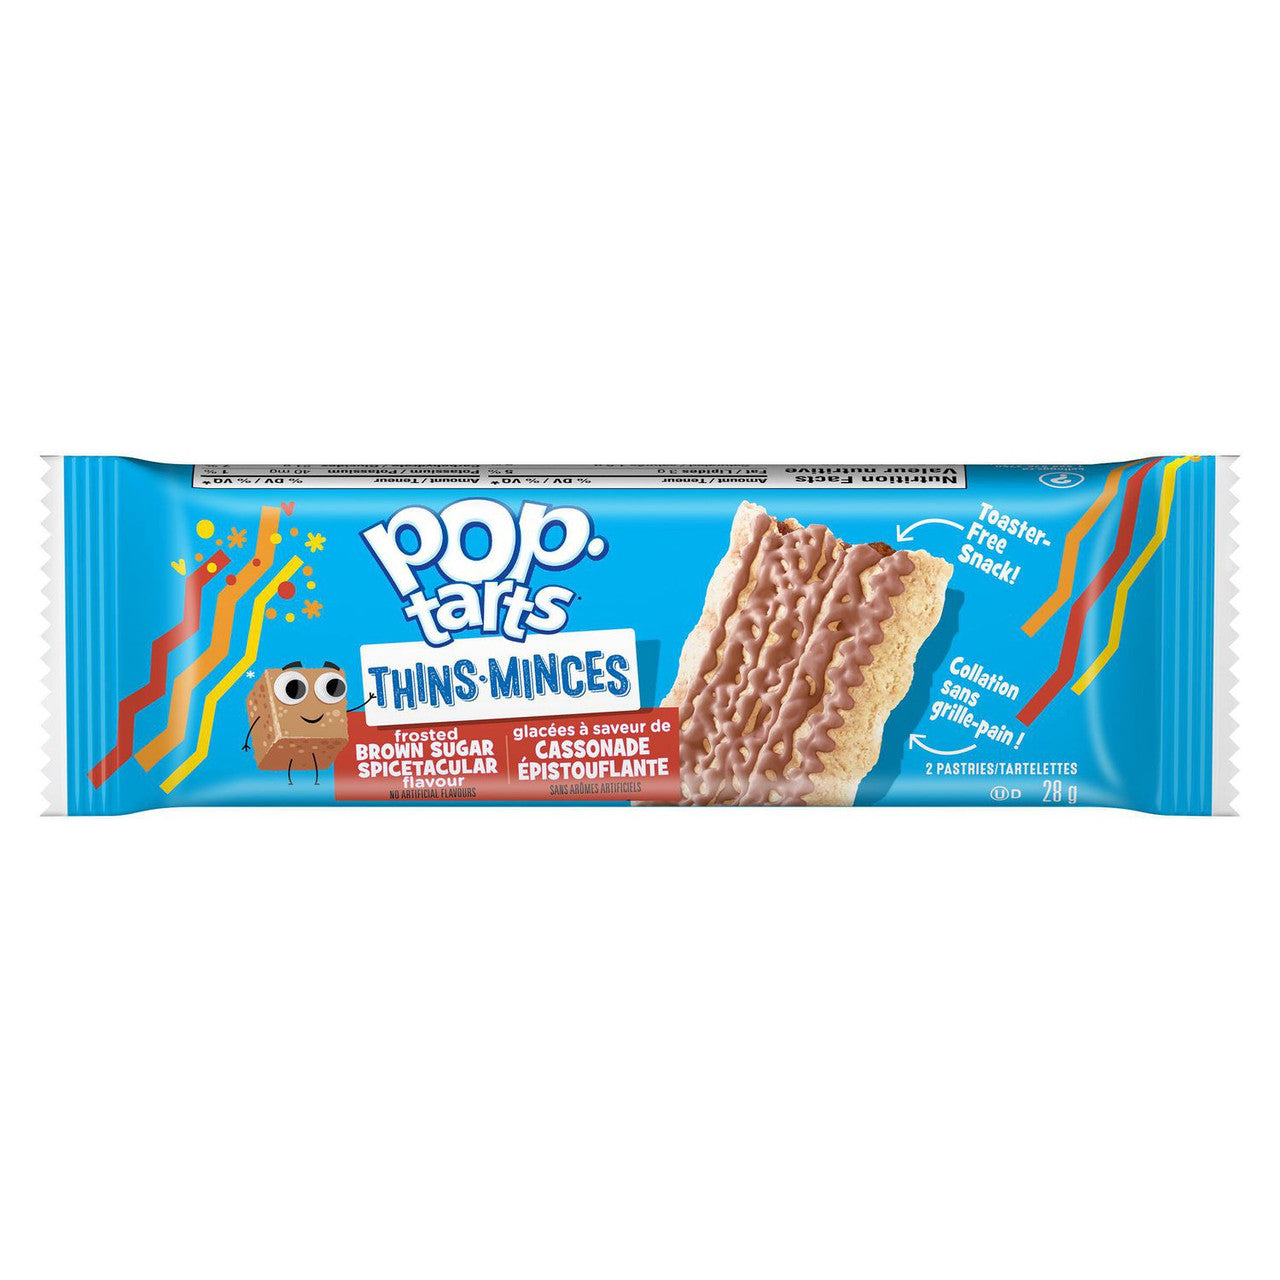 Pop-Tarts Thins, Frosted Brown Sugar flavour, 140g/4.9 oz., {Imported from Canada}